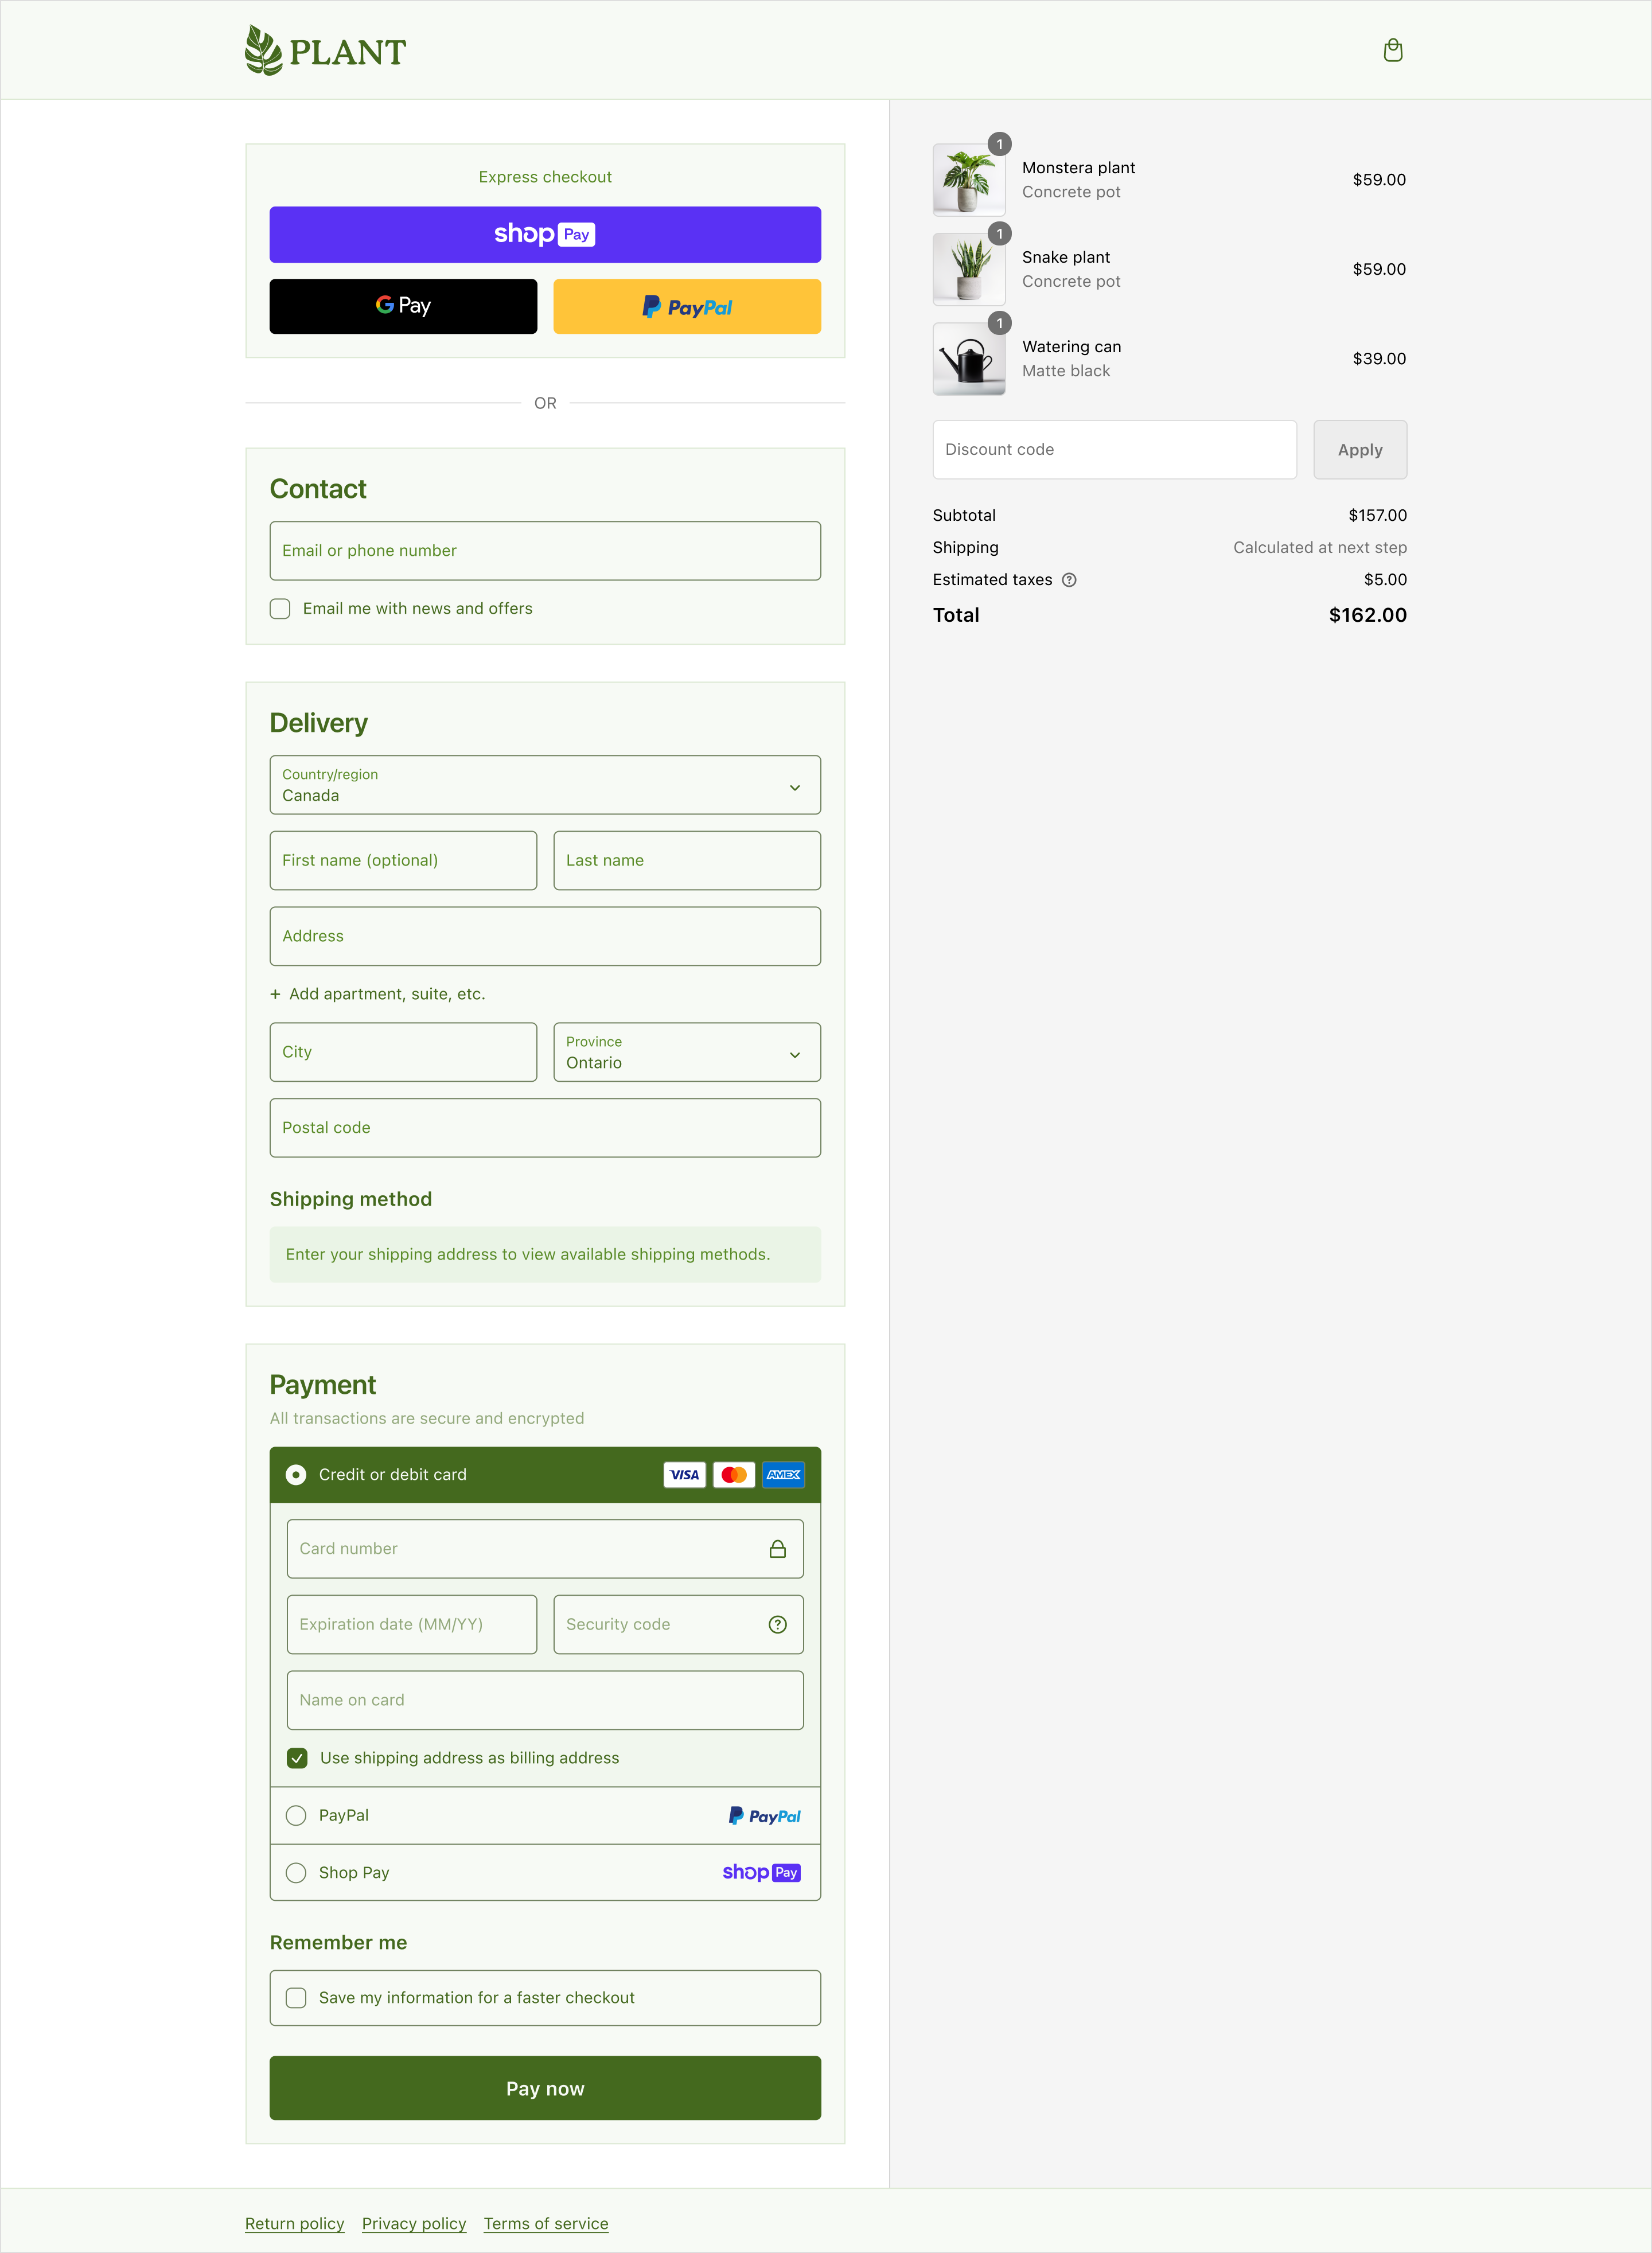 The color scheme applied to the header, footer, and main sections of checkout.